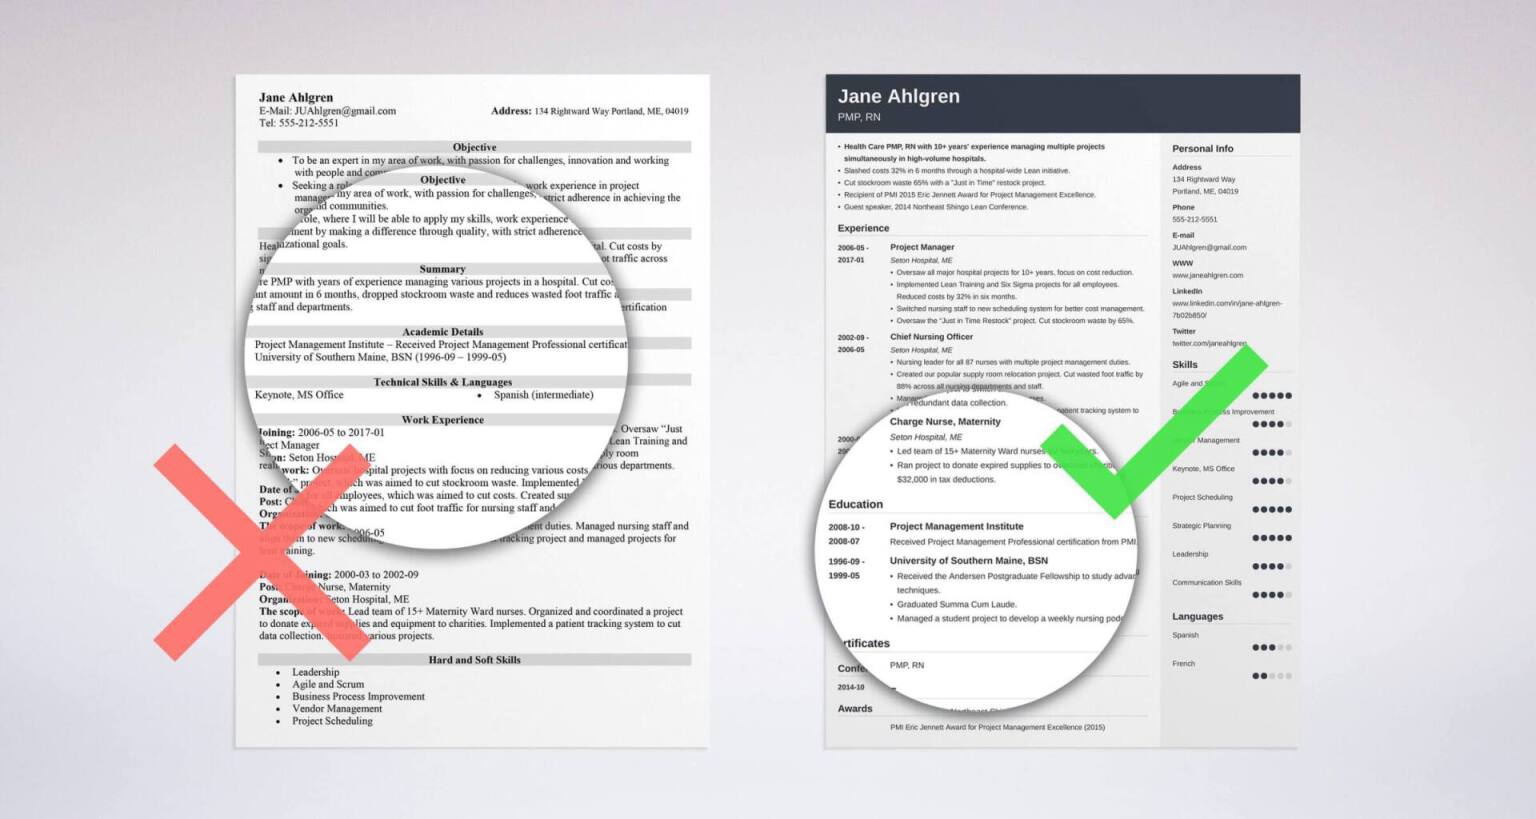 How to List Education on a Resume: Section Examples & Tips